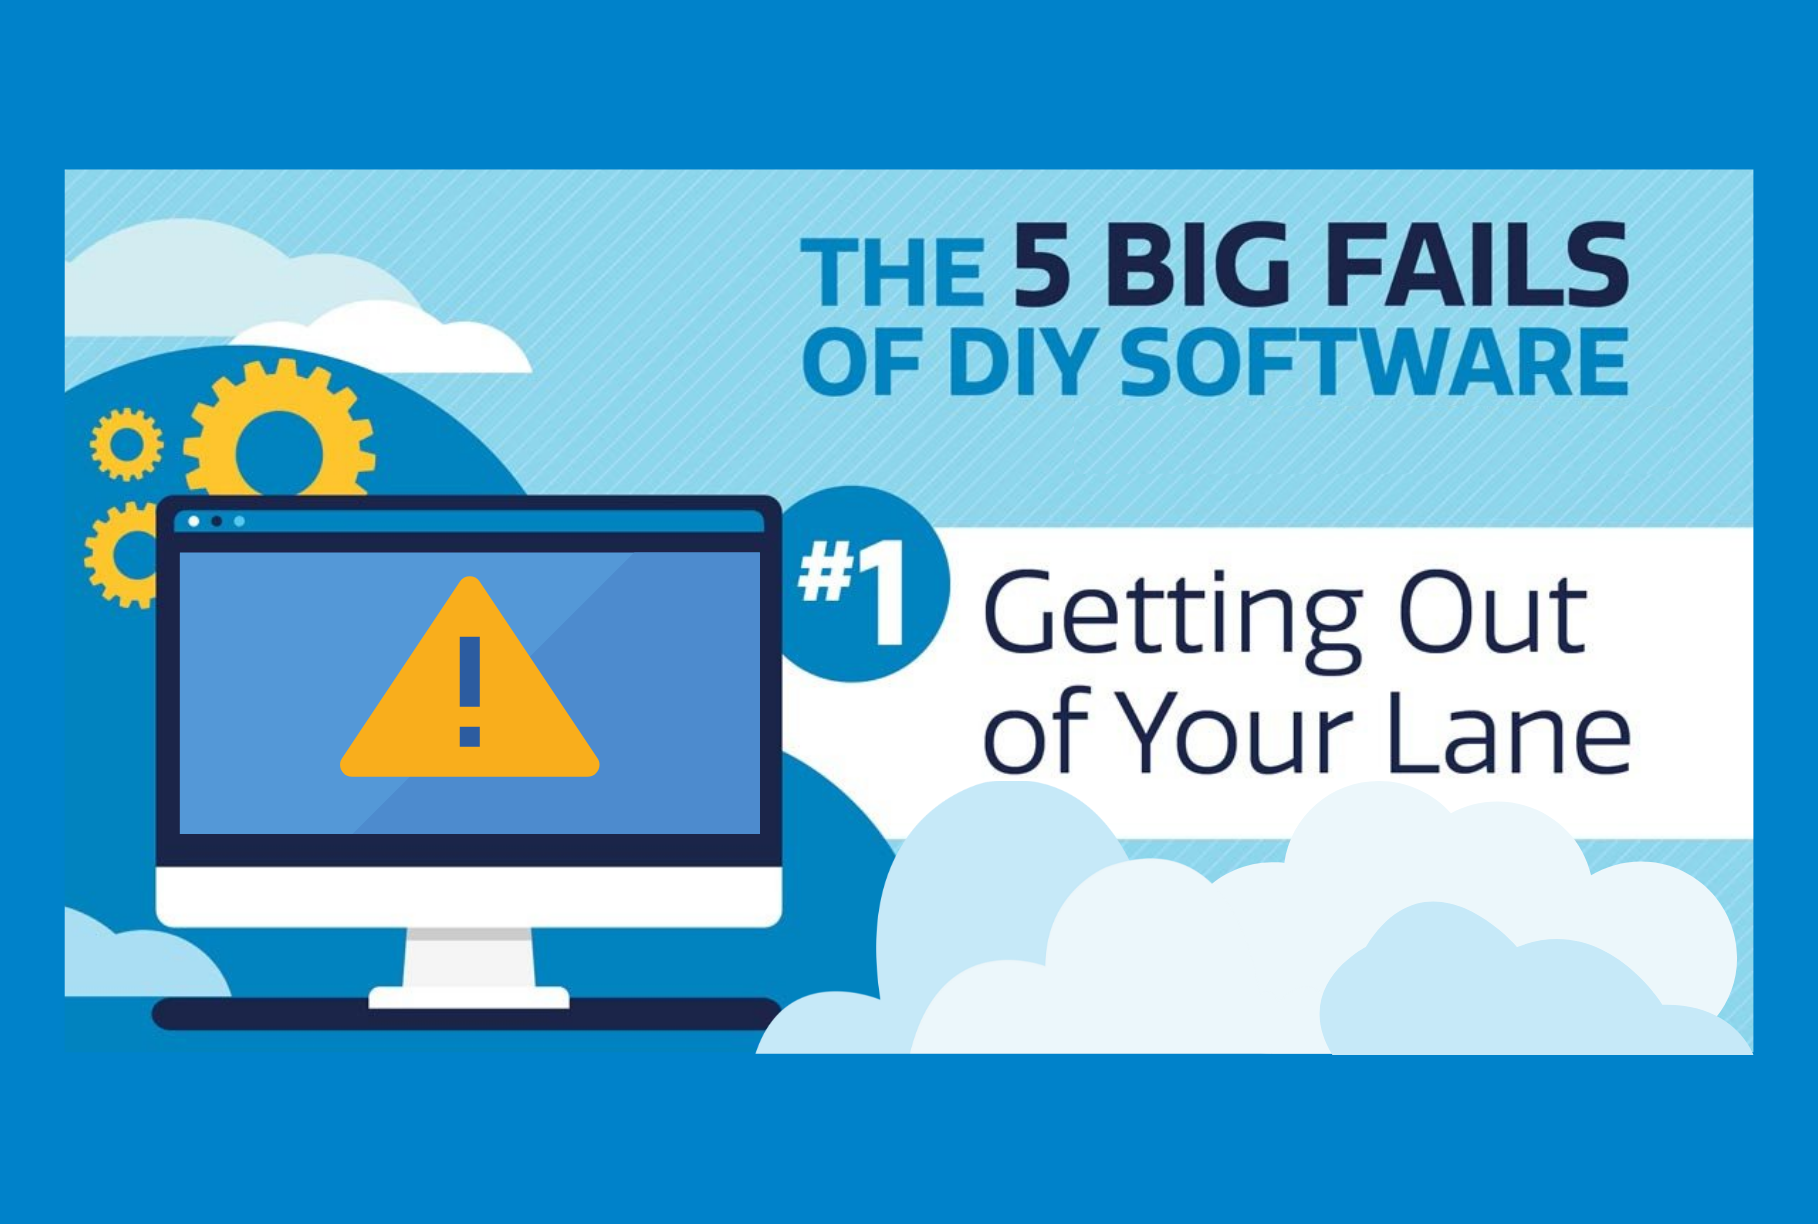 The 5 Big Fails of DIY Software: #1 Getting Out of Your Lane